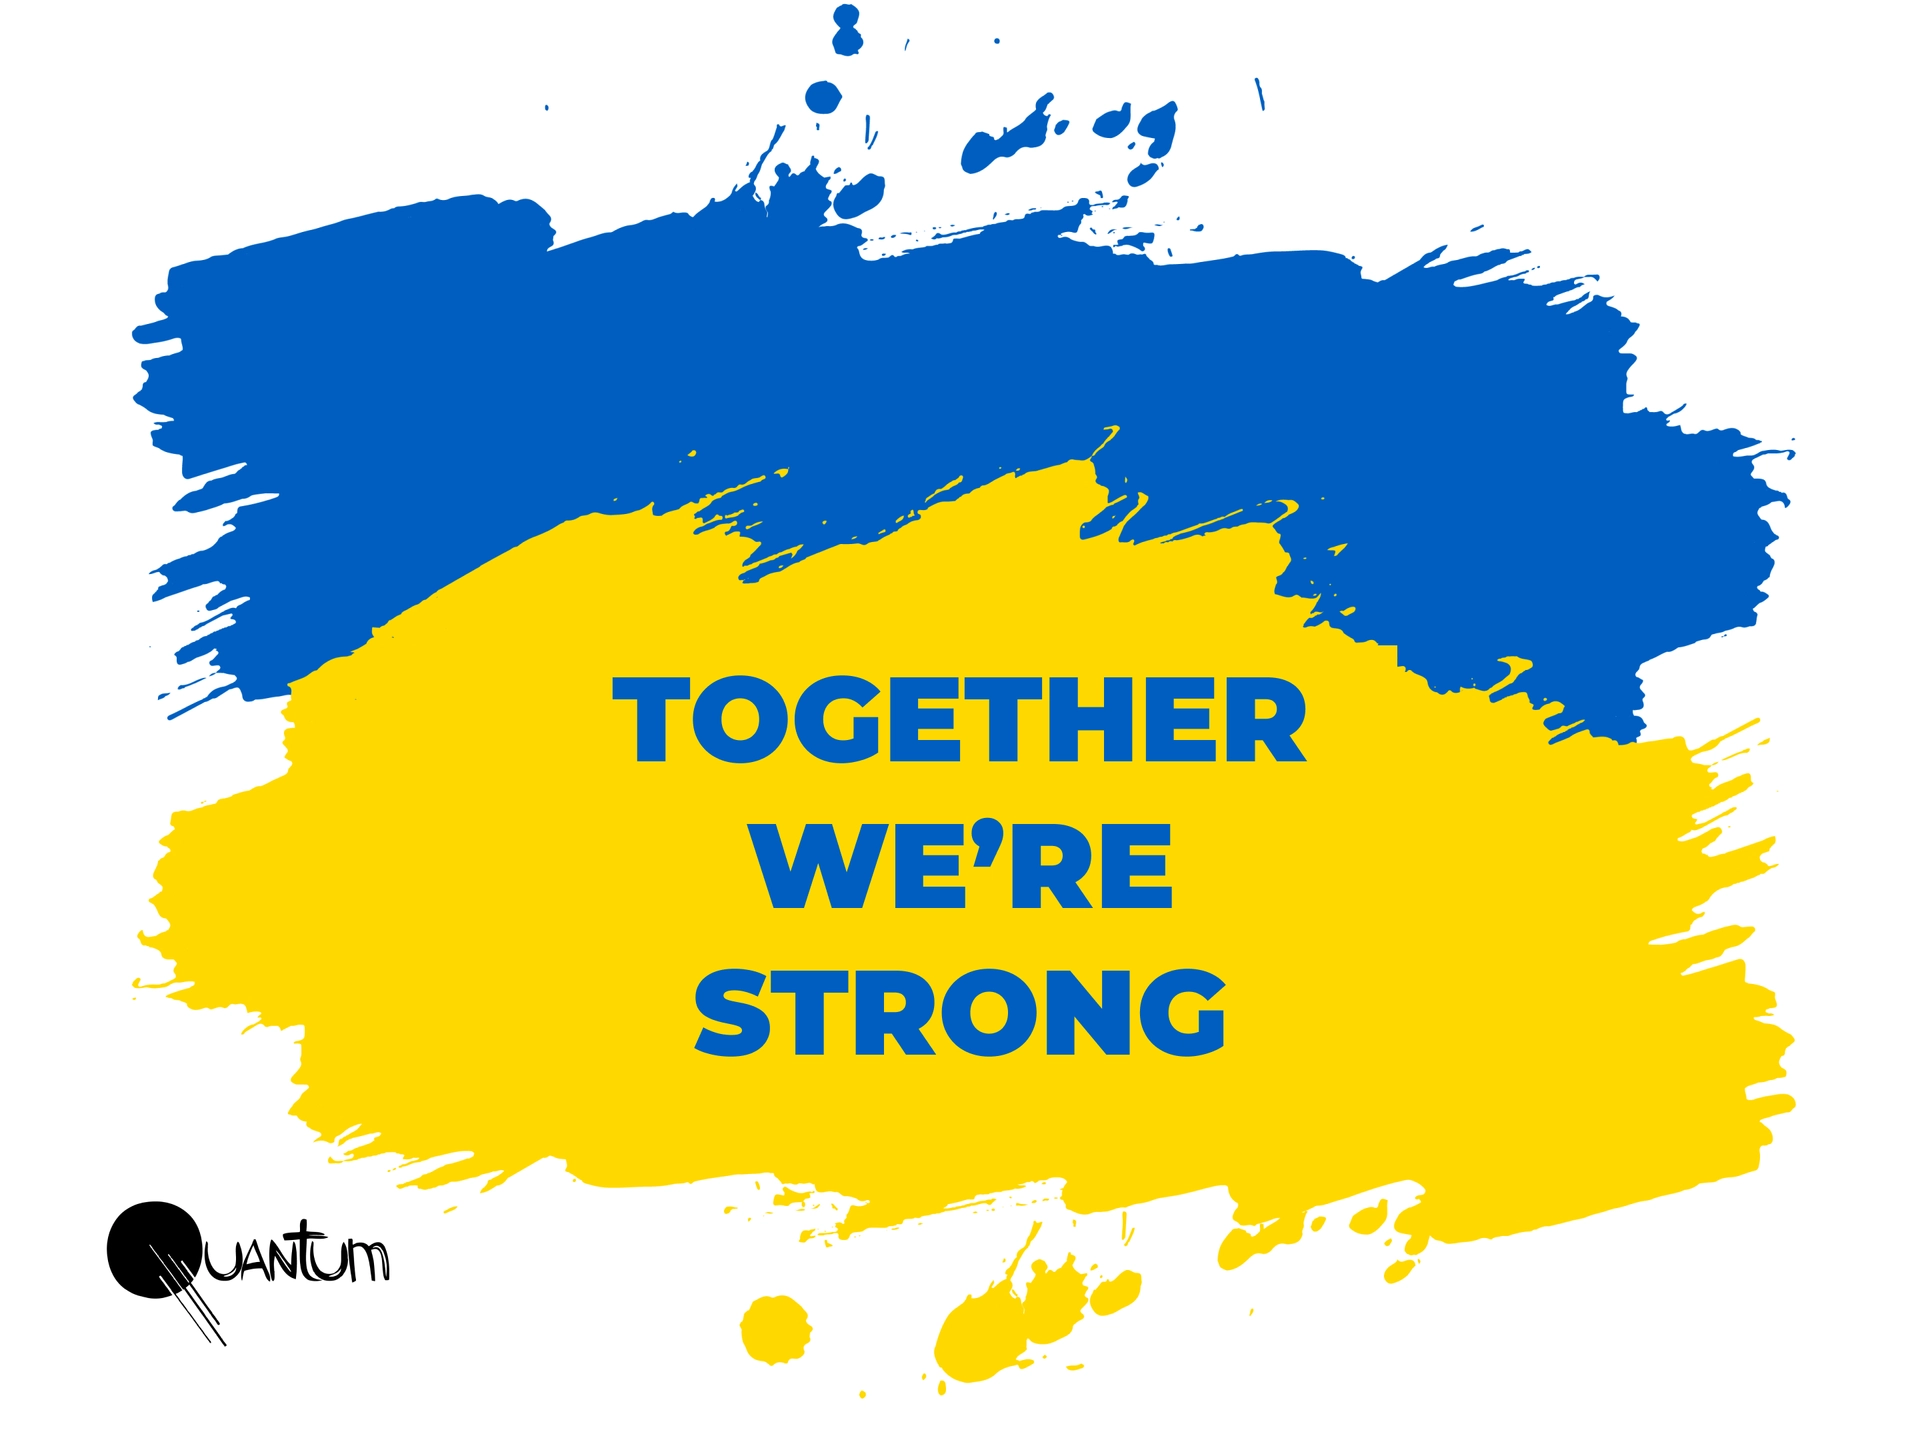 Together we are strong inst